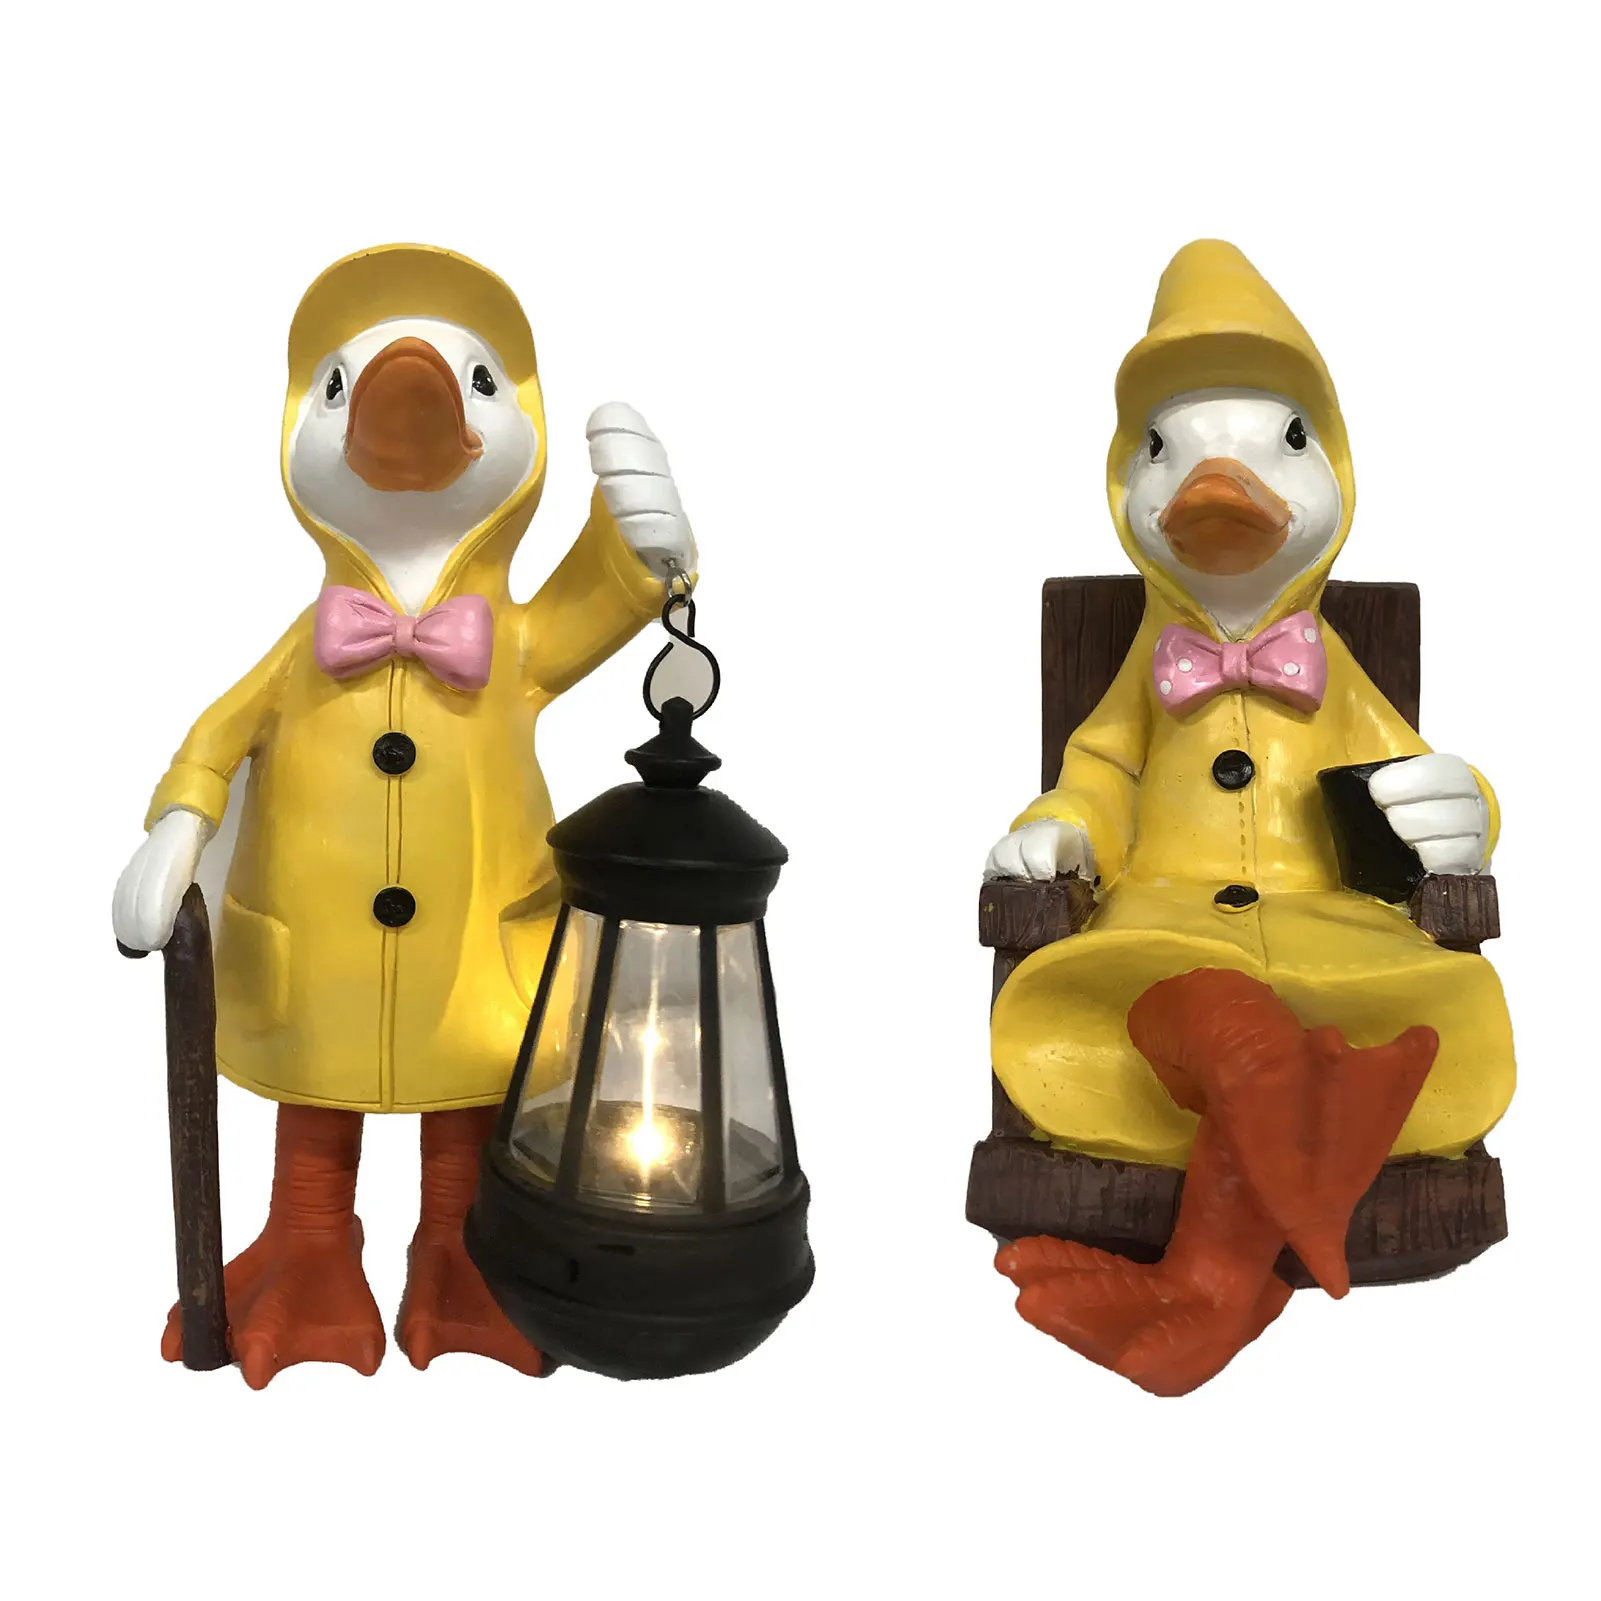 

Newly Outdoor Raincoat Duck Figurine Solar Powered Lovely Duck Decor for Outside Patio Yard Lawn Decor